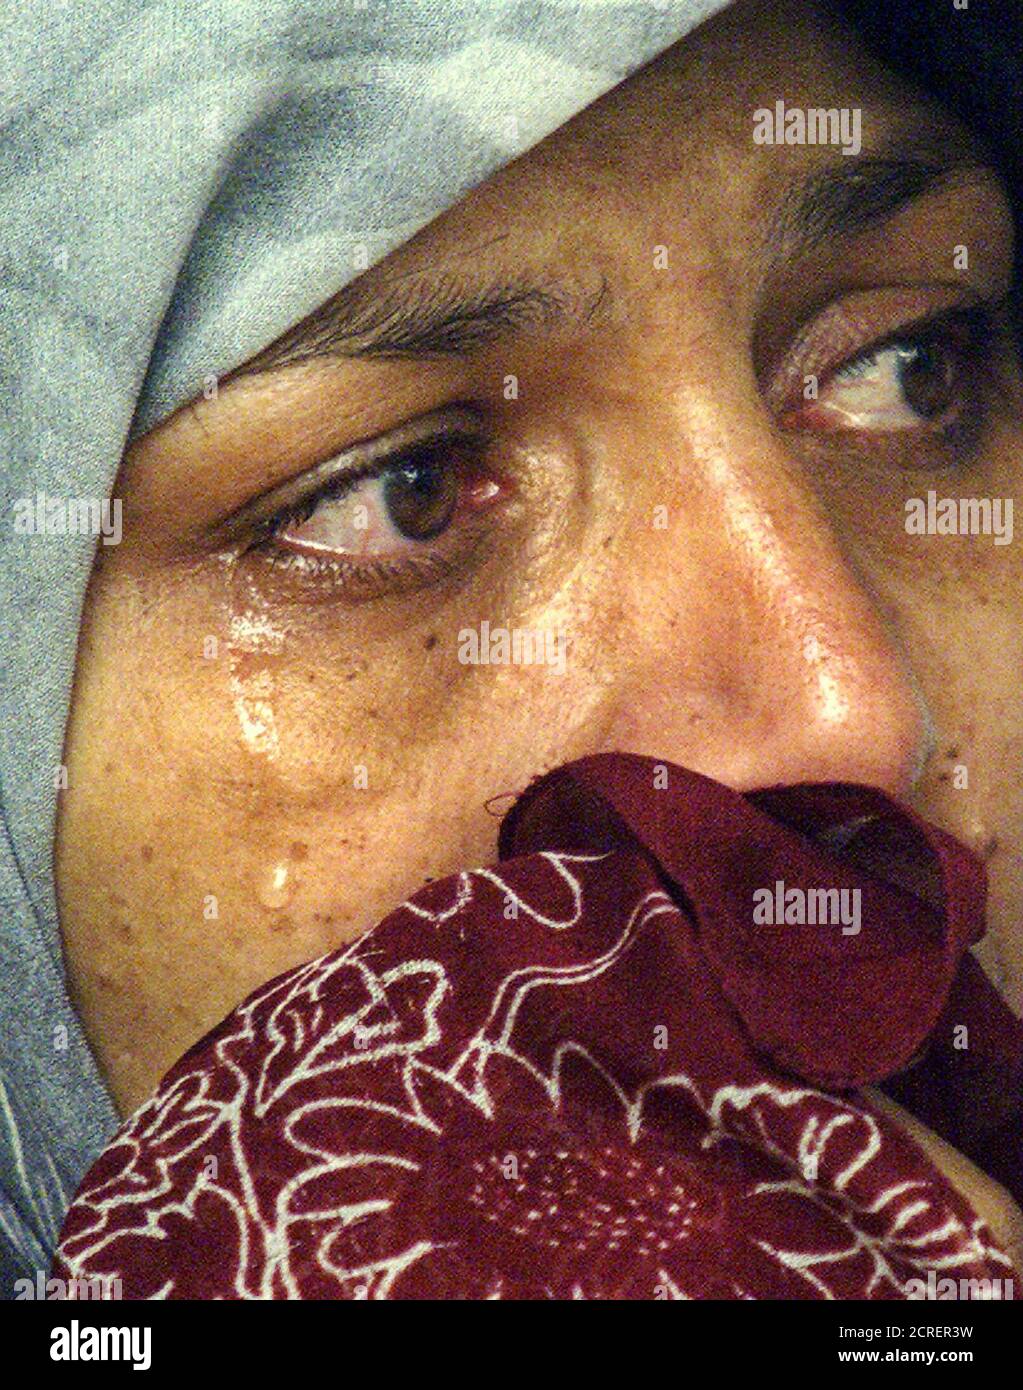 An Afghan woman who didn't want to be named wipes away her tears as she talks to journalists outside the United Nations High Commissioner for Refugees (UNHCR) office in Kuala Lumpur, January 25, 2002. The woman, who is an ethnic Hazara, said she came to Malaysia with her husband and two children four months ago hoping to get refugee status. The woman said her family is now hiding in a village near Kuala Lumpur, and is asking UNHCR to send them home to Afghanistan. Though things are bad in Afghanistan, she said maybe it would be better there than being a fugitive in Malaysia. REUTERS/Bazuki Muh Stock Photo